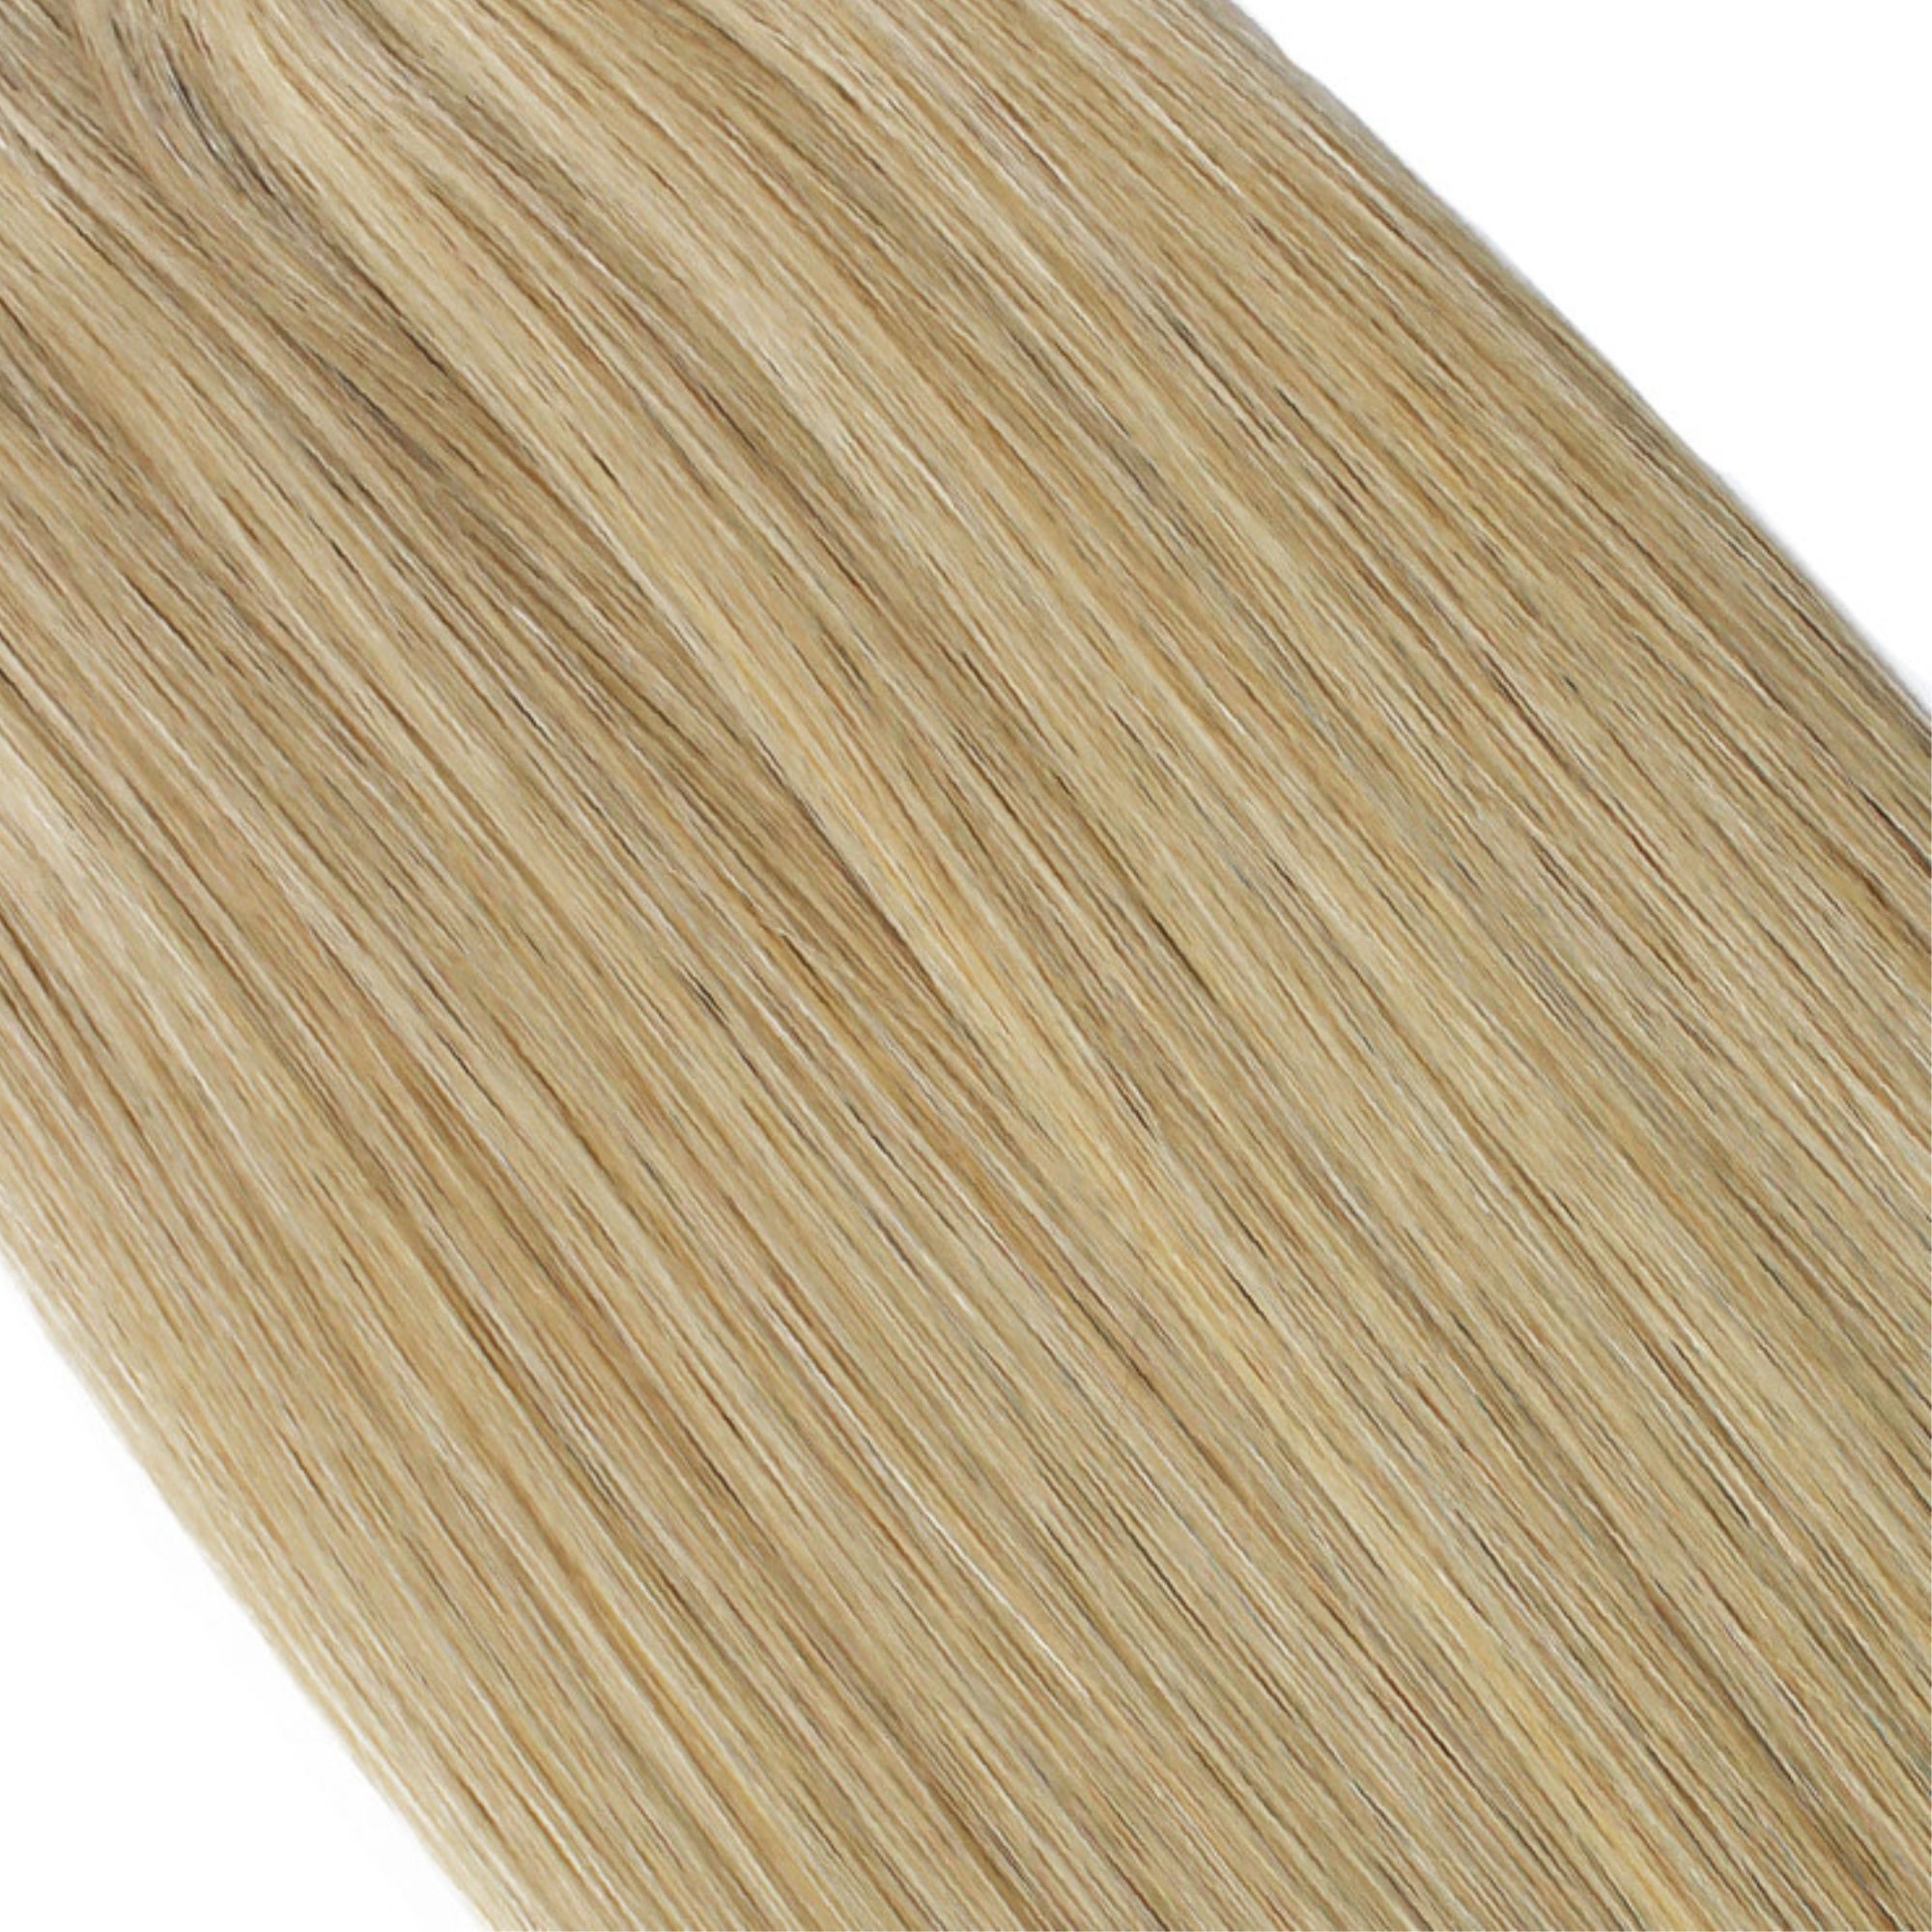 "hair rehab london 14" stick tip hair extensions shade swatch titled dirty blonde"